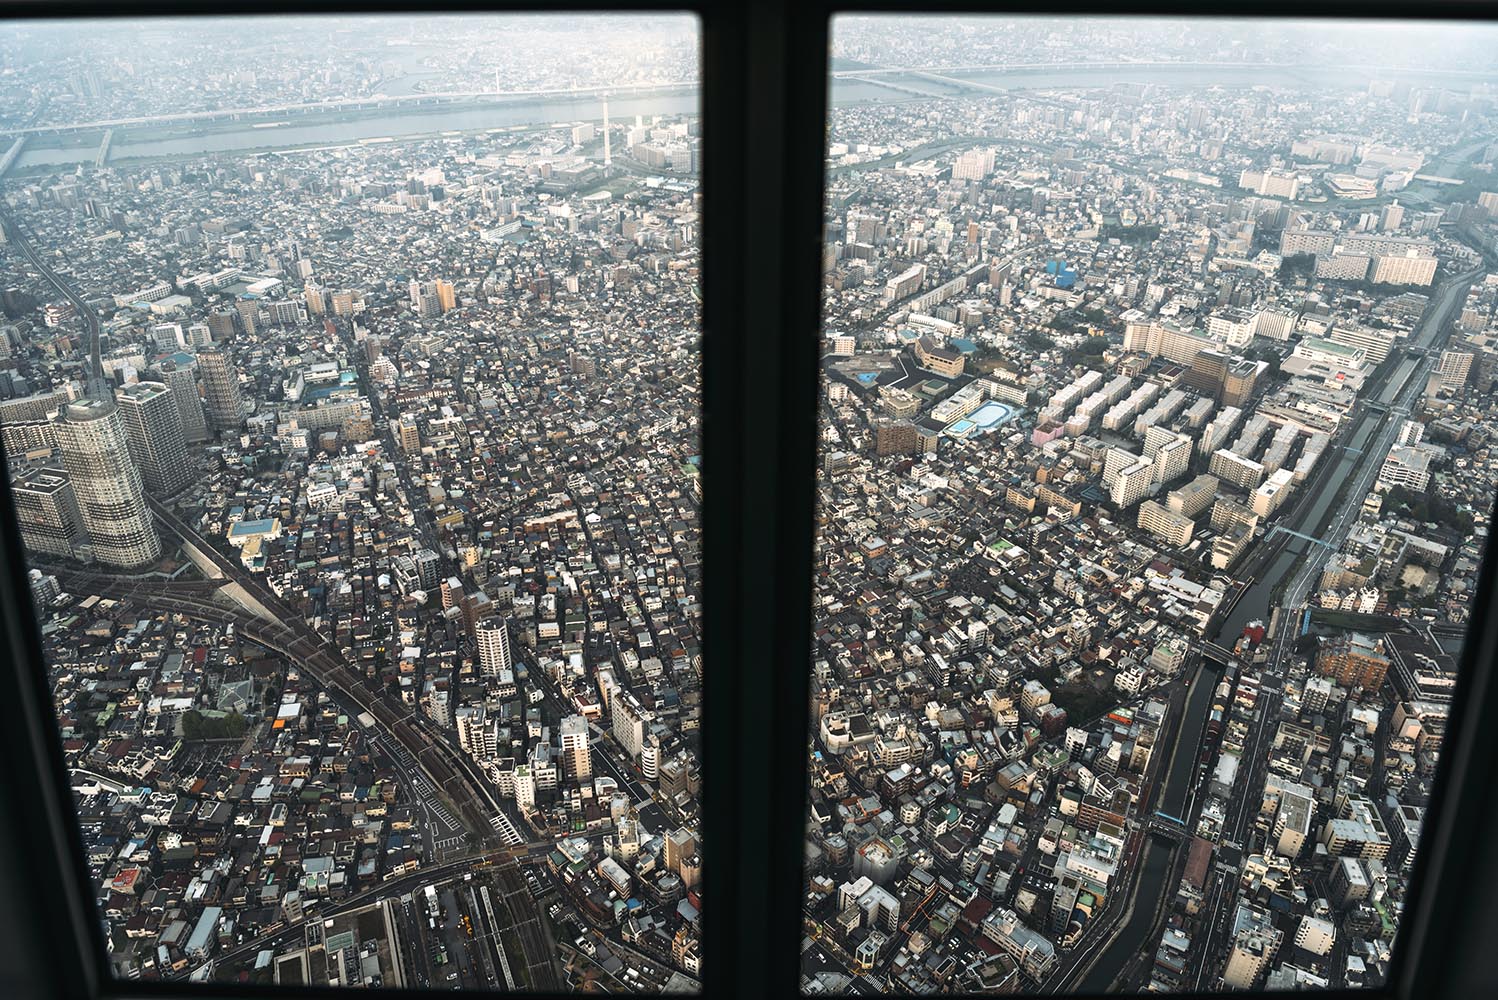 View from Tokyo Skytree at sunset, Tokyo, Japan